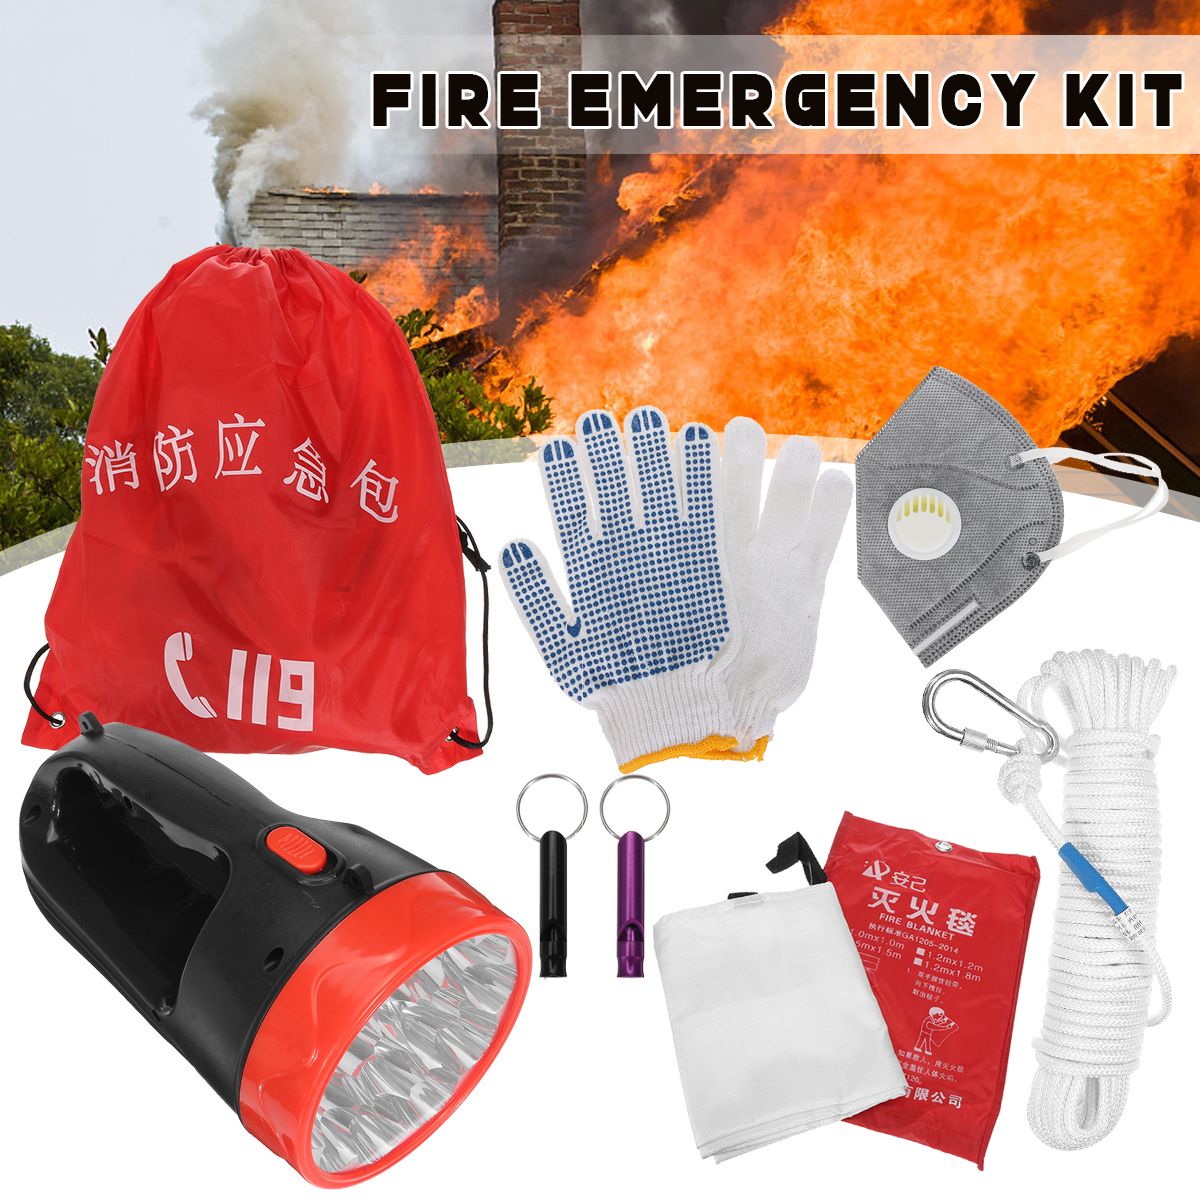 Family-Fire-Emergency-Kit-Descending-Rope-Mask-Whistle-Survival-Tools-Accessories-1537071